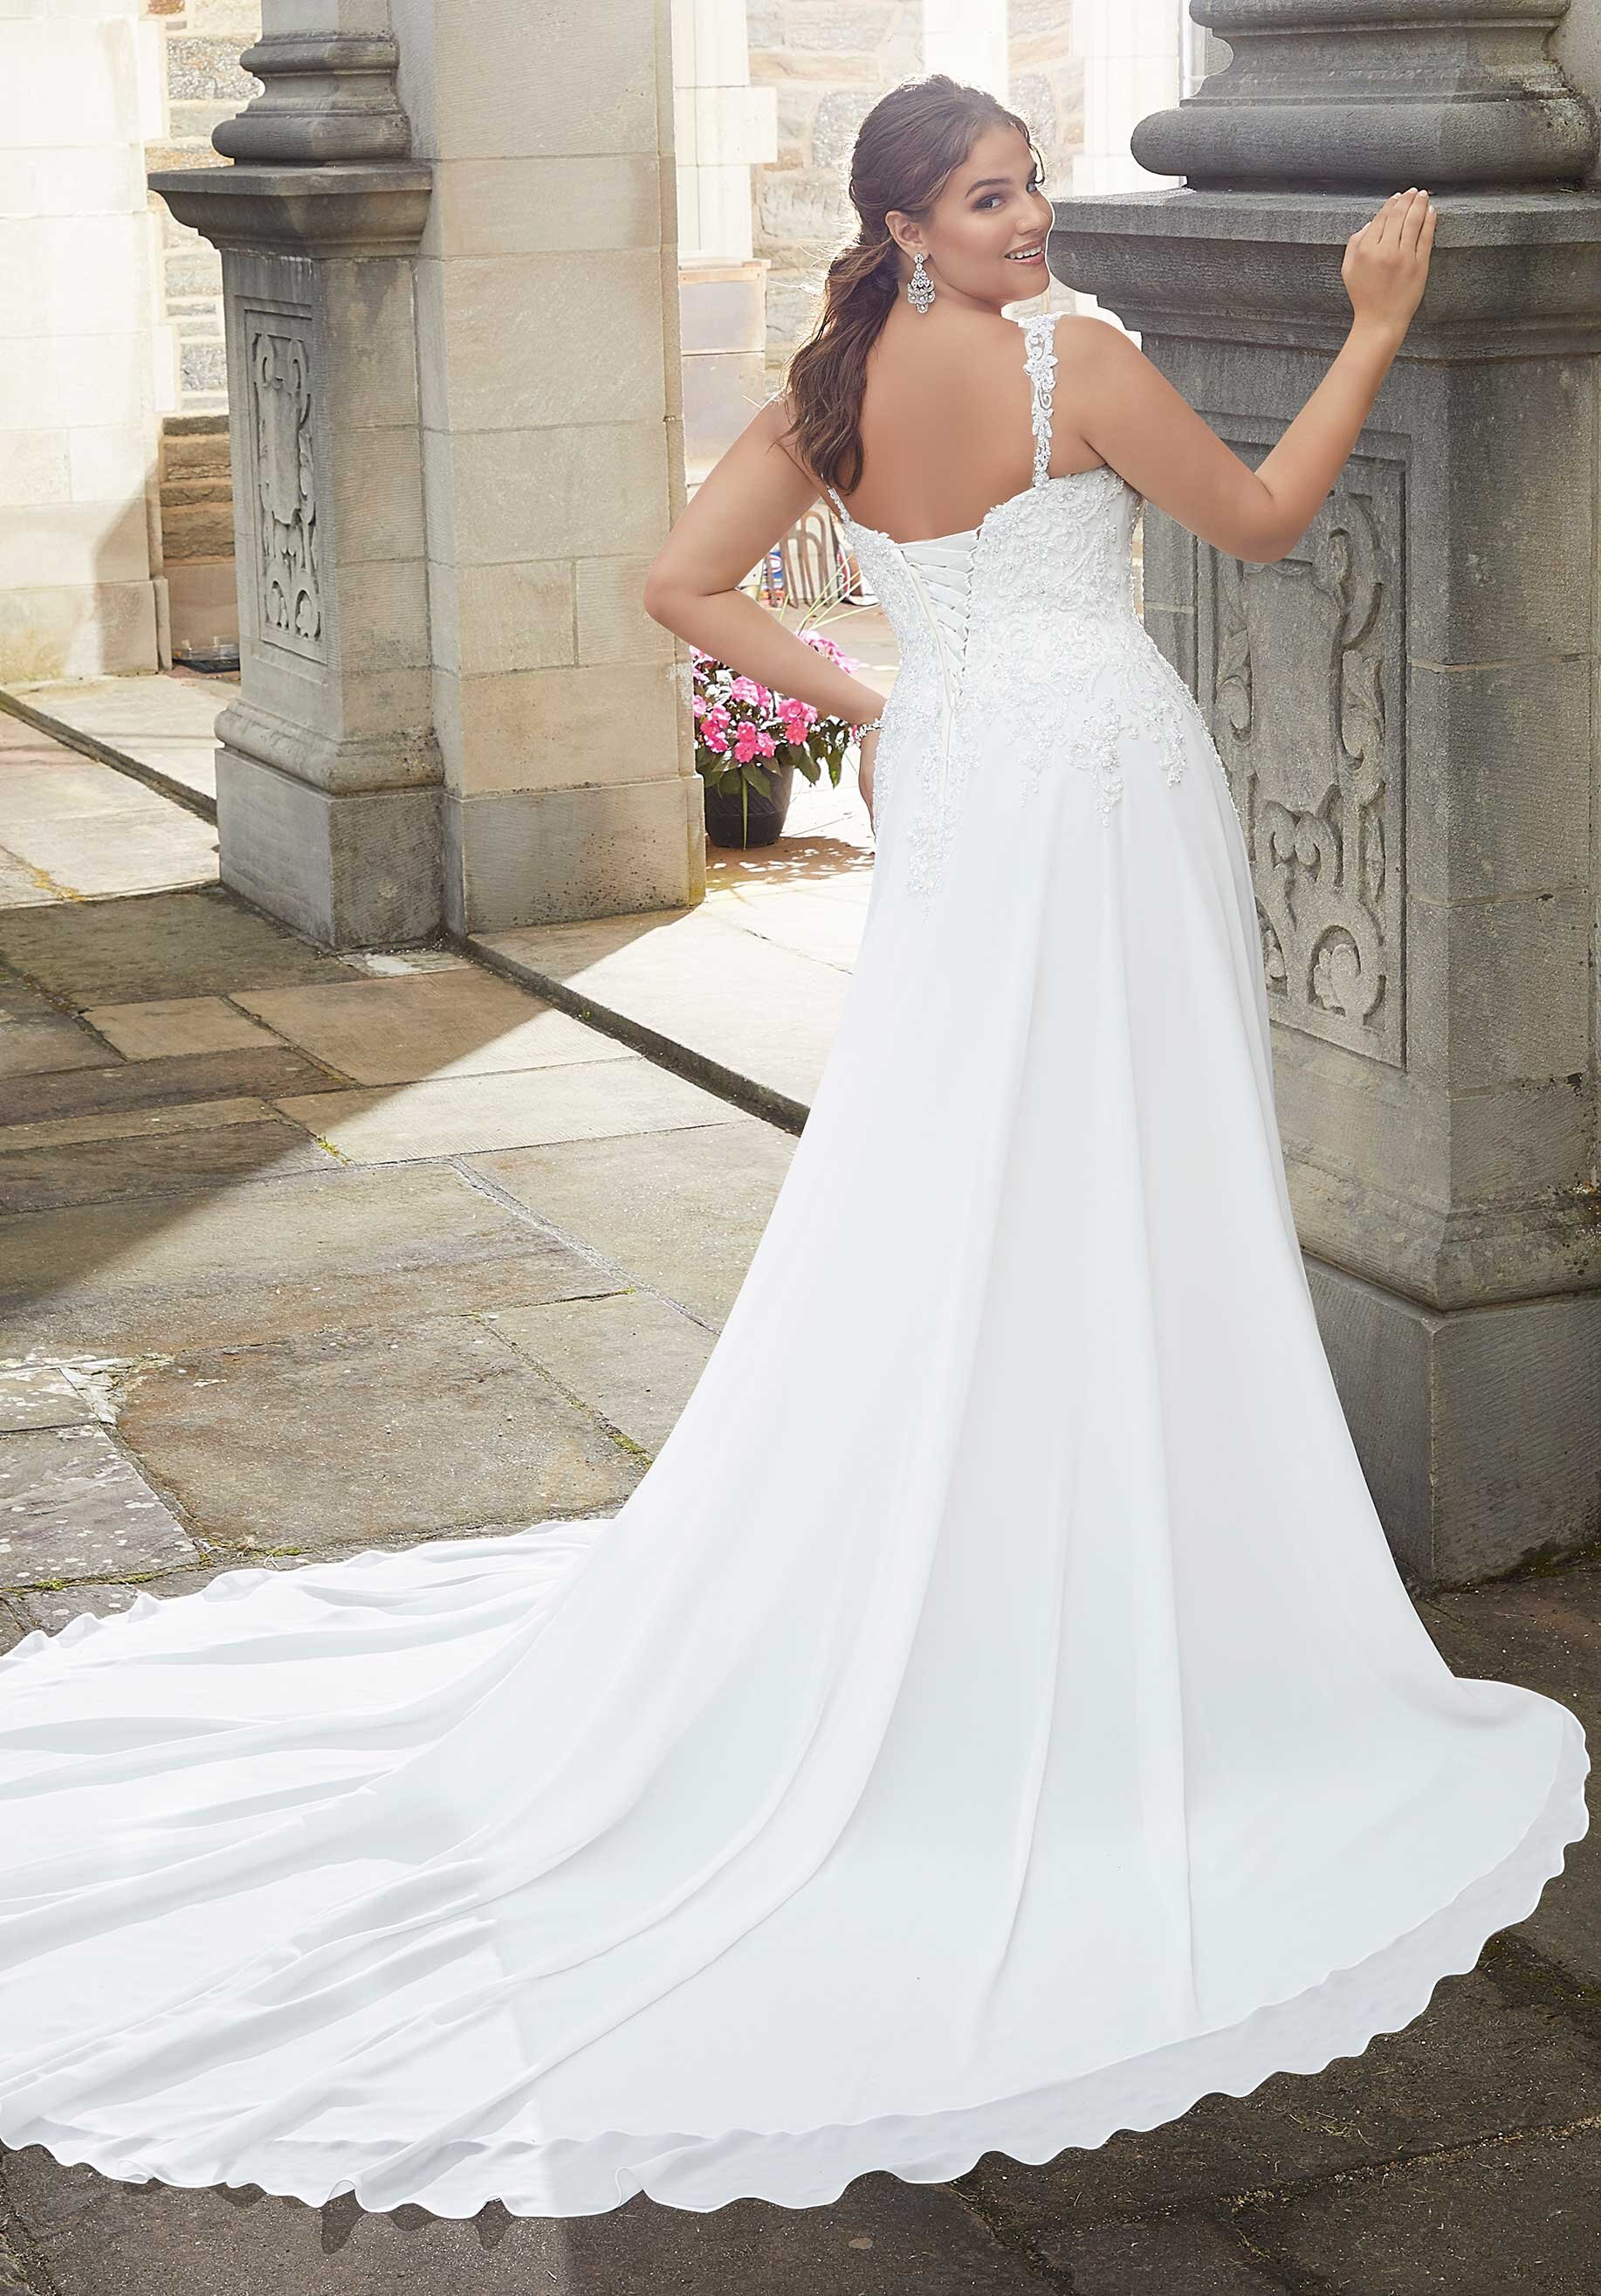 Brides-by-Young-Curvy-Plus-Size-Bridal-Chicago-Illinois-Indianapolis-Indiana-New-Jersey-Morilee-3282-Sylvia-Back.jpg